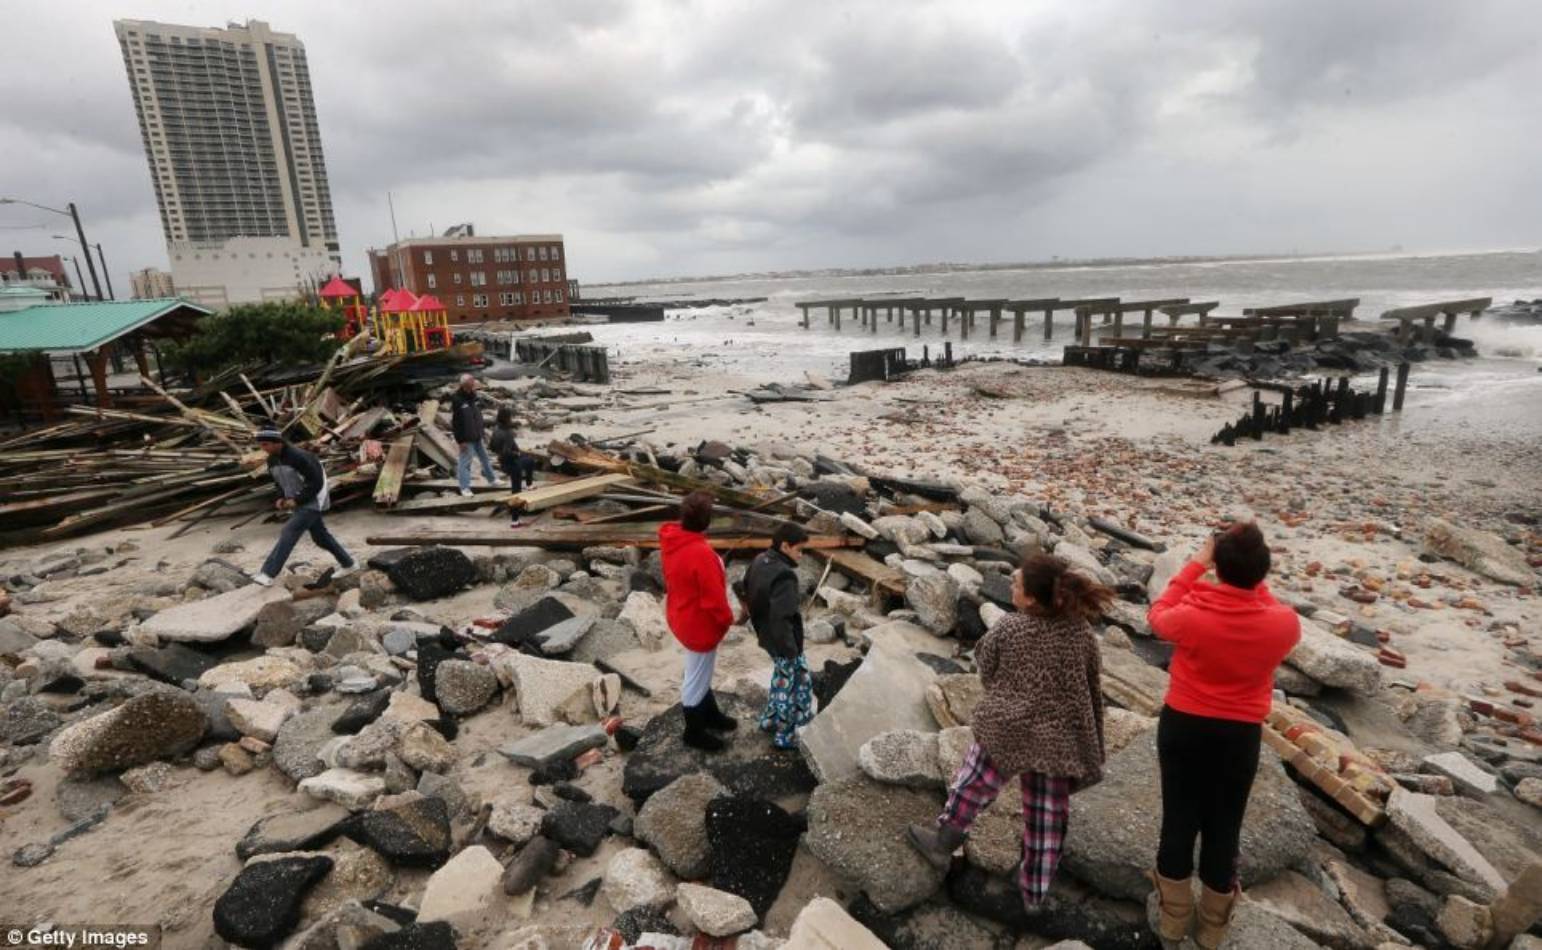 Rubble: People in Atlantic City view the area where a 2000-foot section of the 'uptown' boardwalk was destroyed by flooding